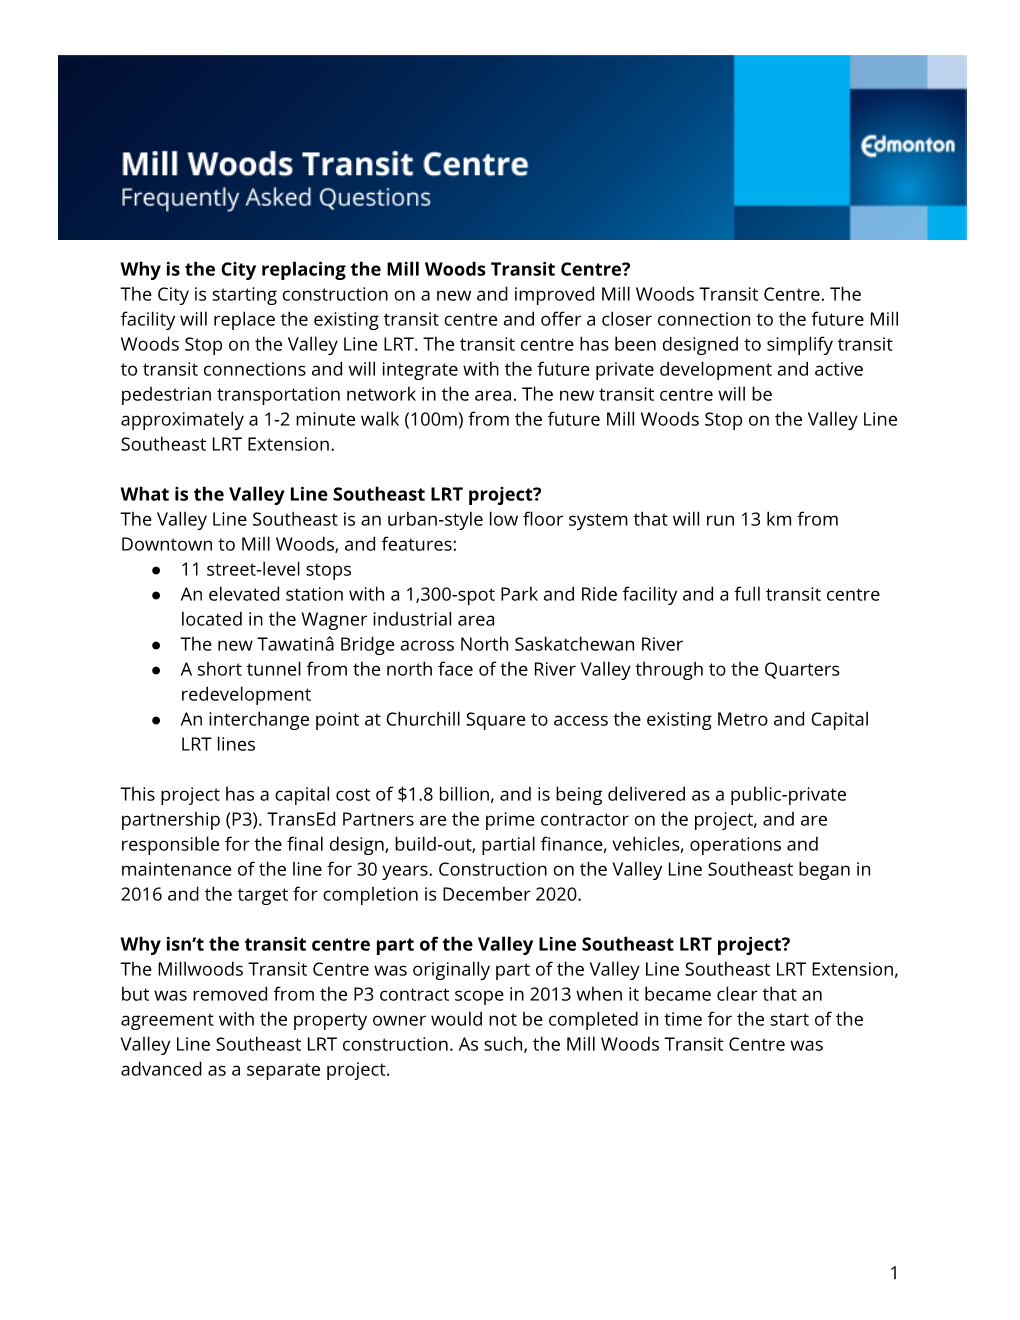 Mill Woods Transit Centre? the City Is Starting Construction on a New and Improved Mill Woods Transit Centre